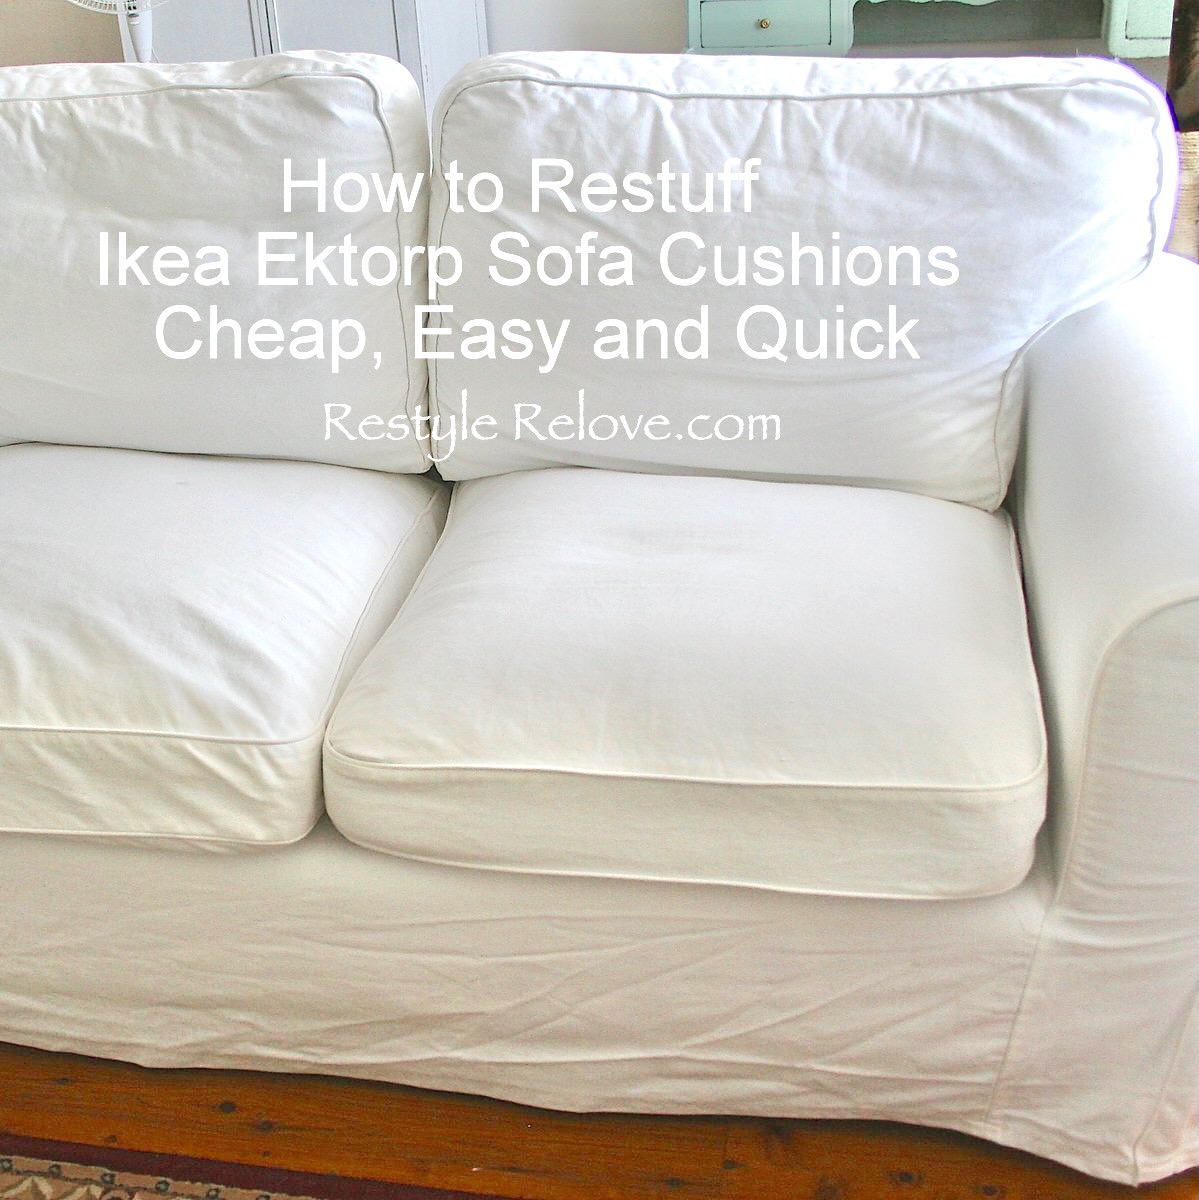 HOW TO RESTUFF IKEA EKTORP SOFA CUSHIONS CHEAP, EASY AND QUICK